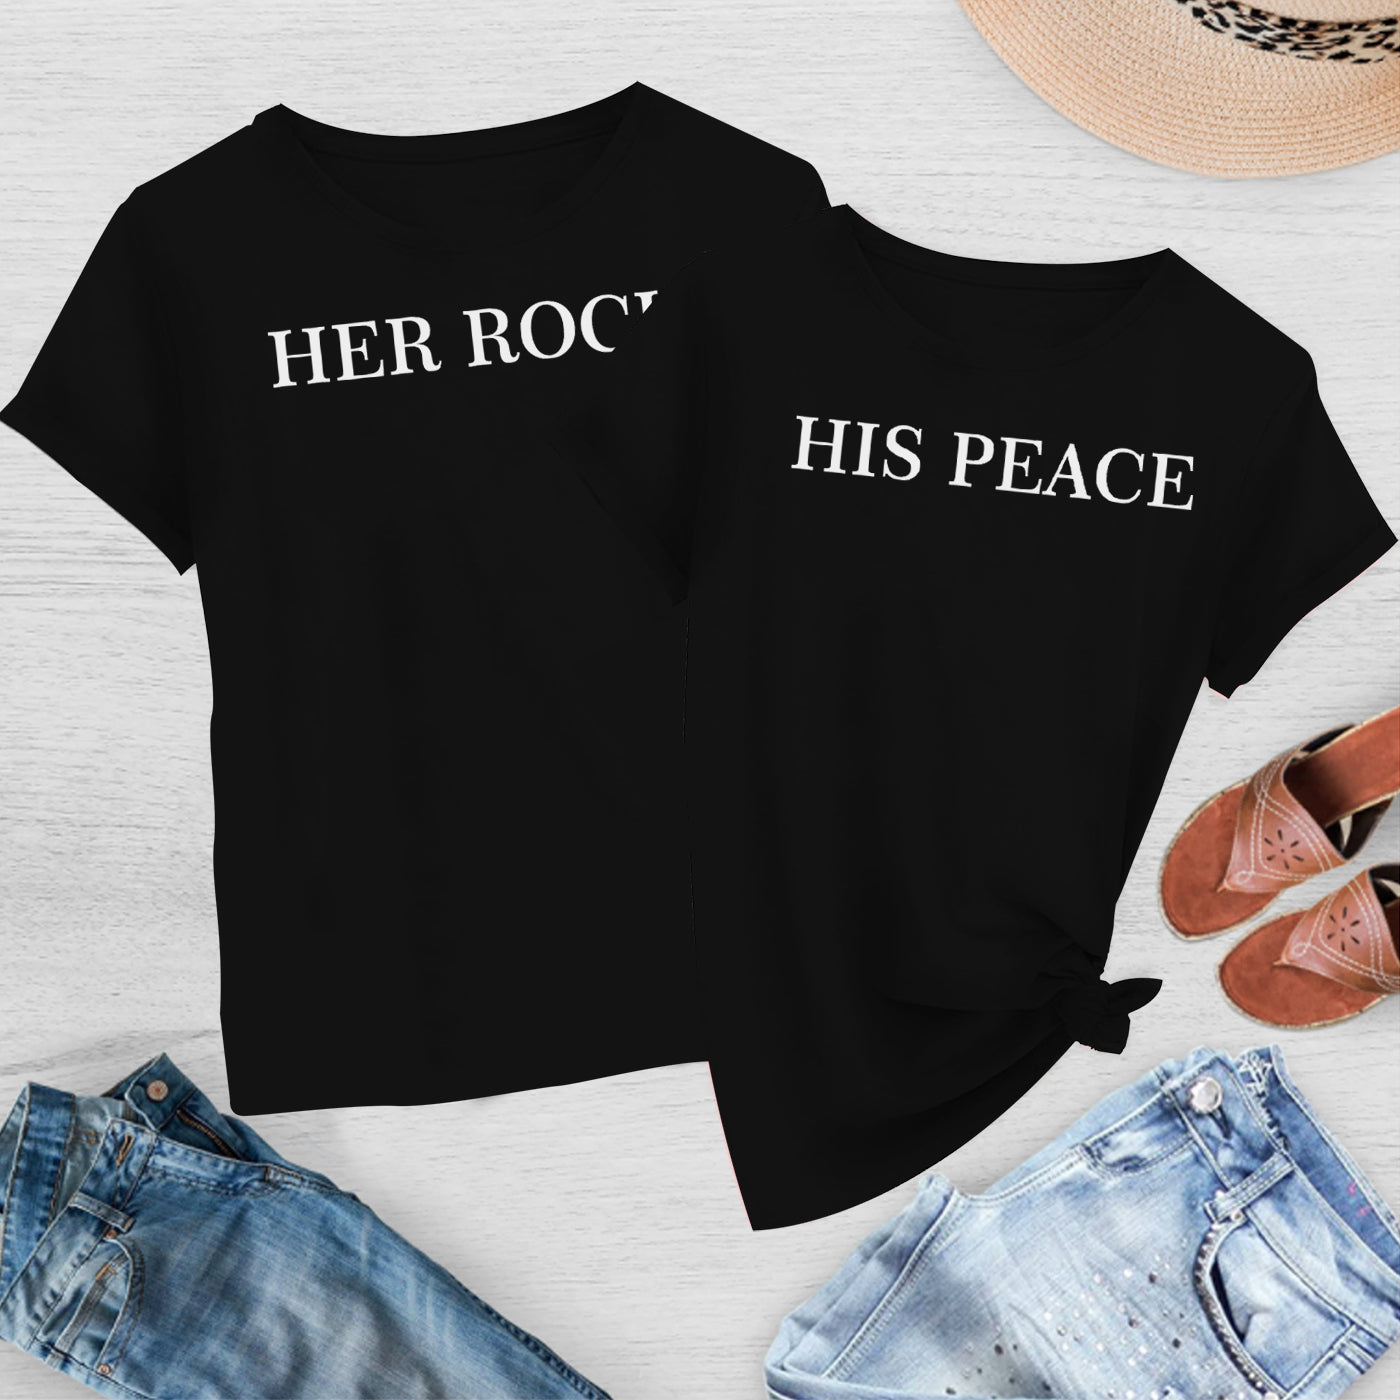 Her Rock - His Peace Tees